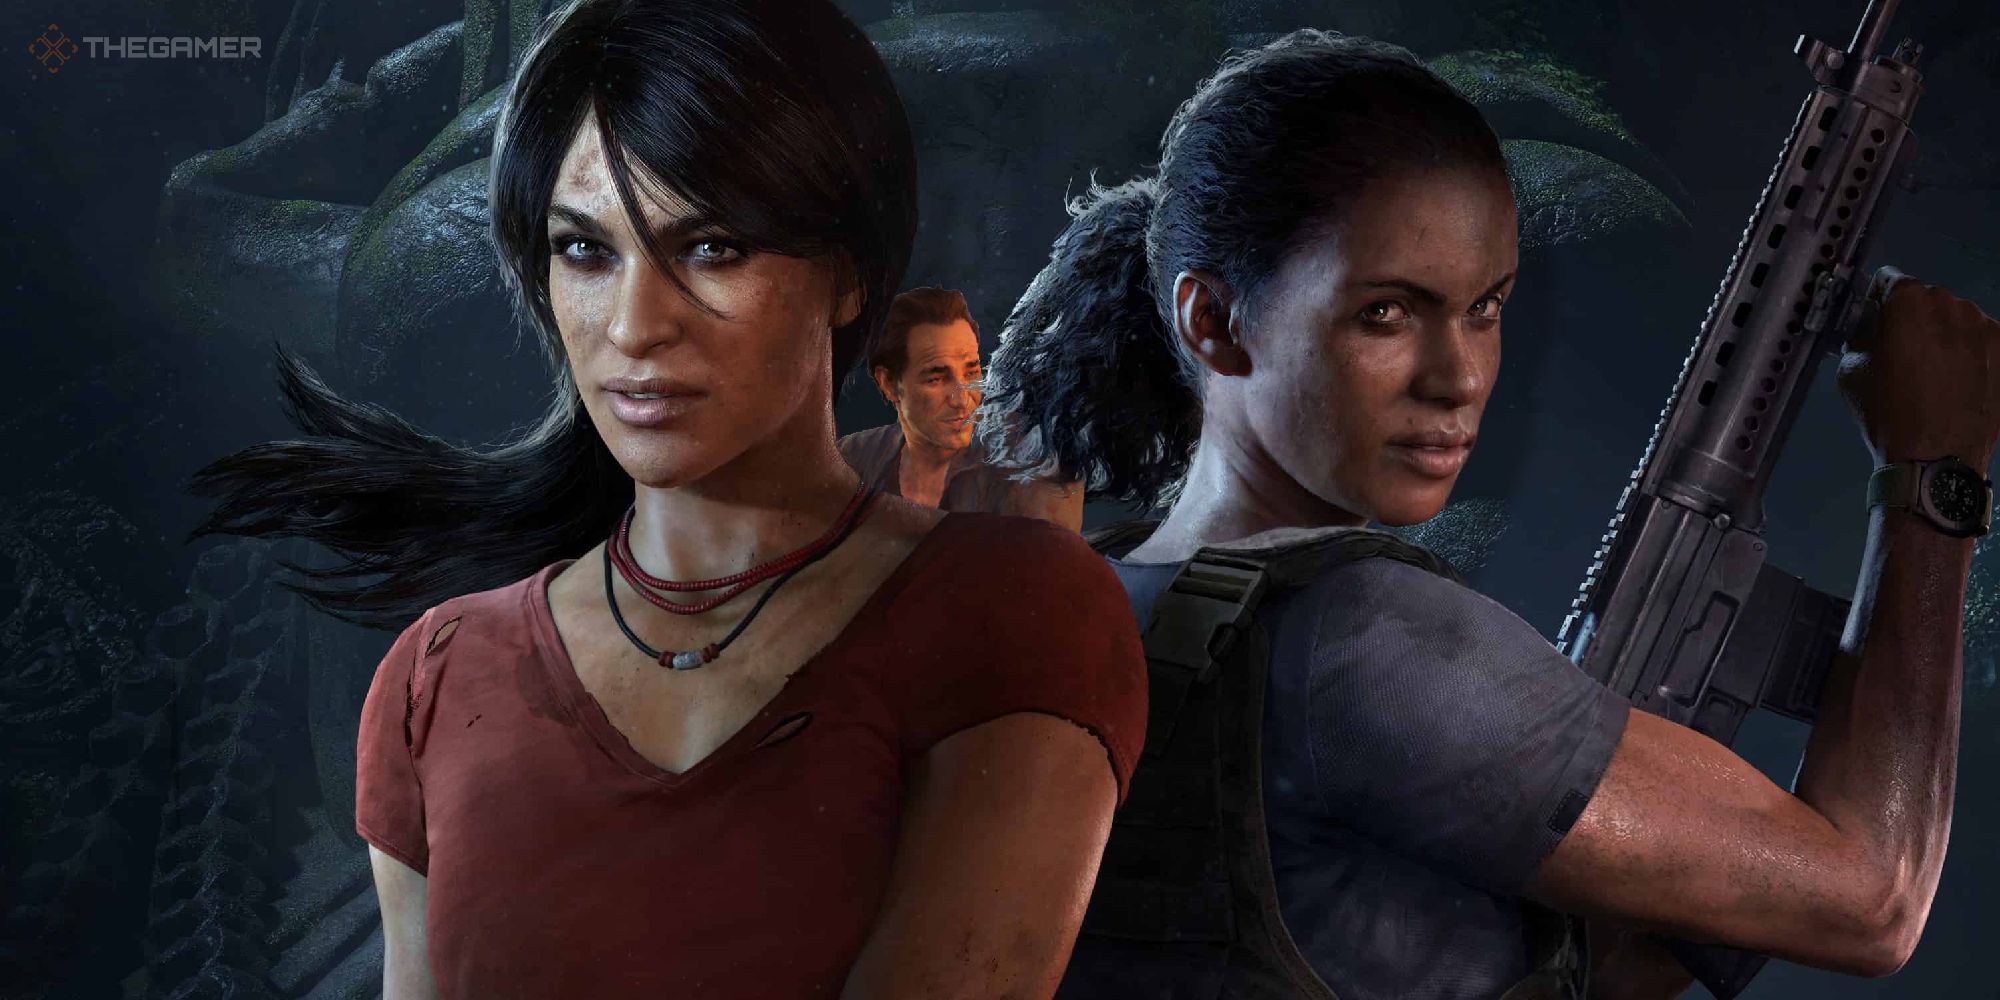 Top 5 Female Characters in Uncharted - KeenGamer